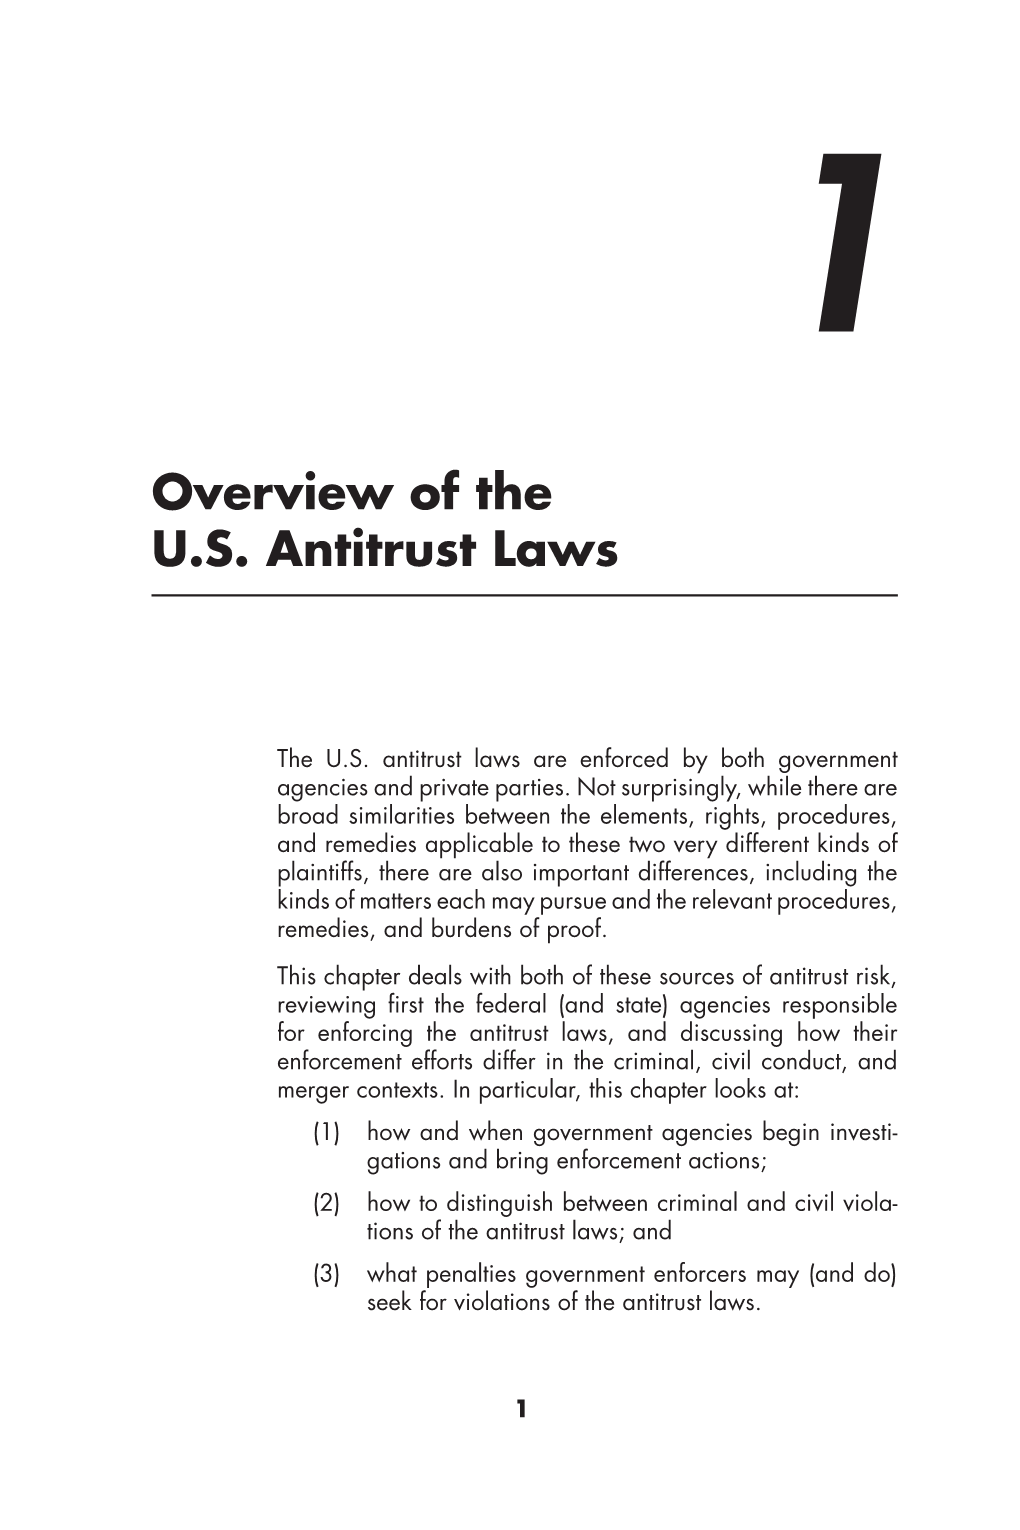 Overview of the U.S. Antitrust Laws